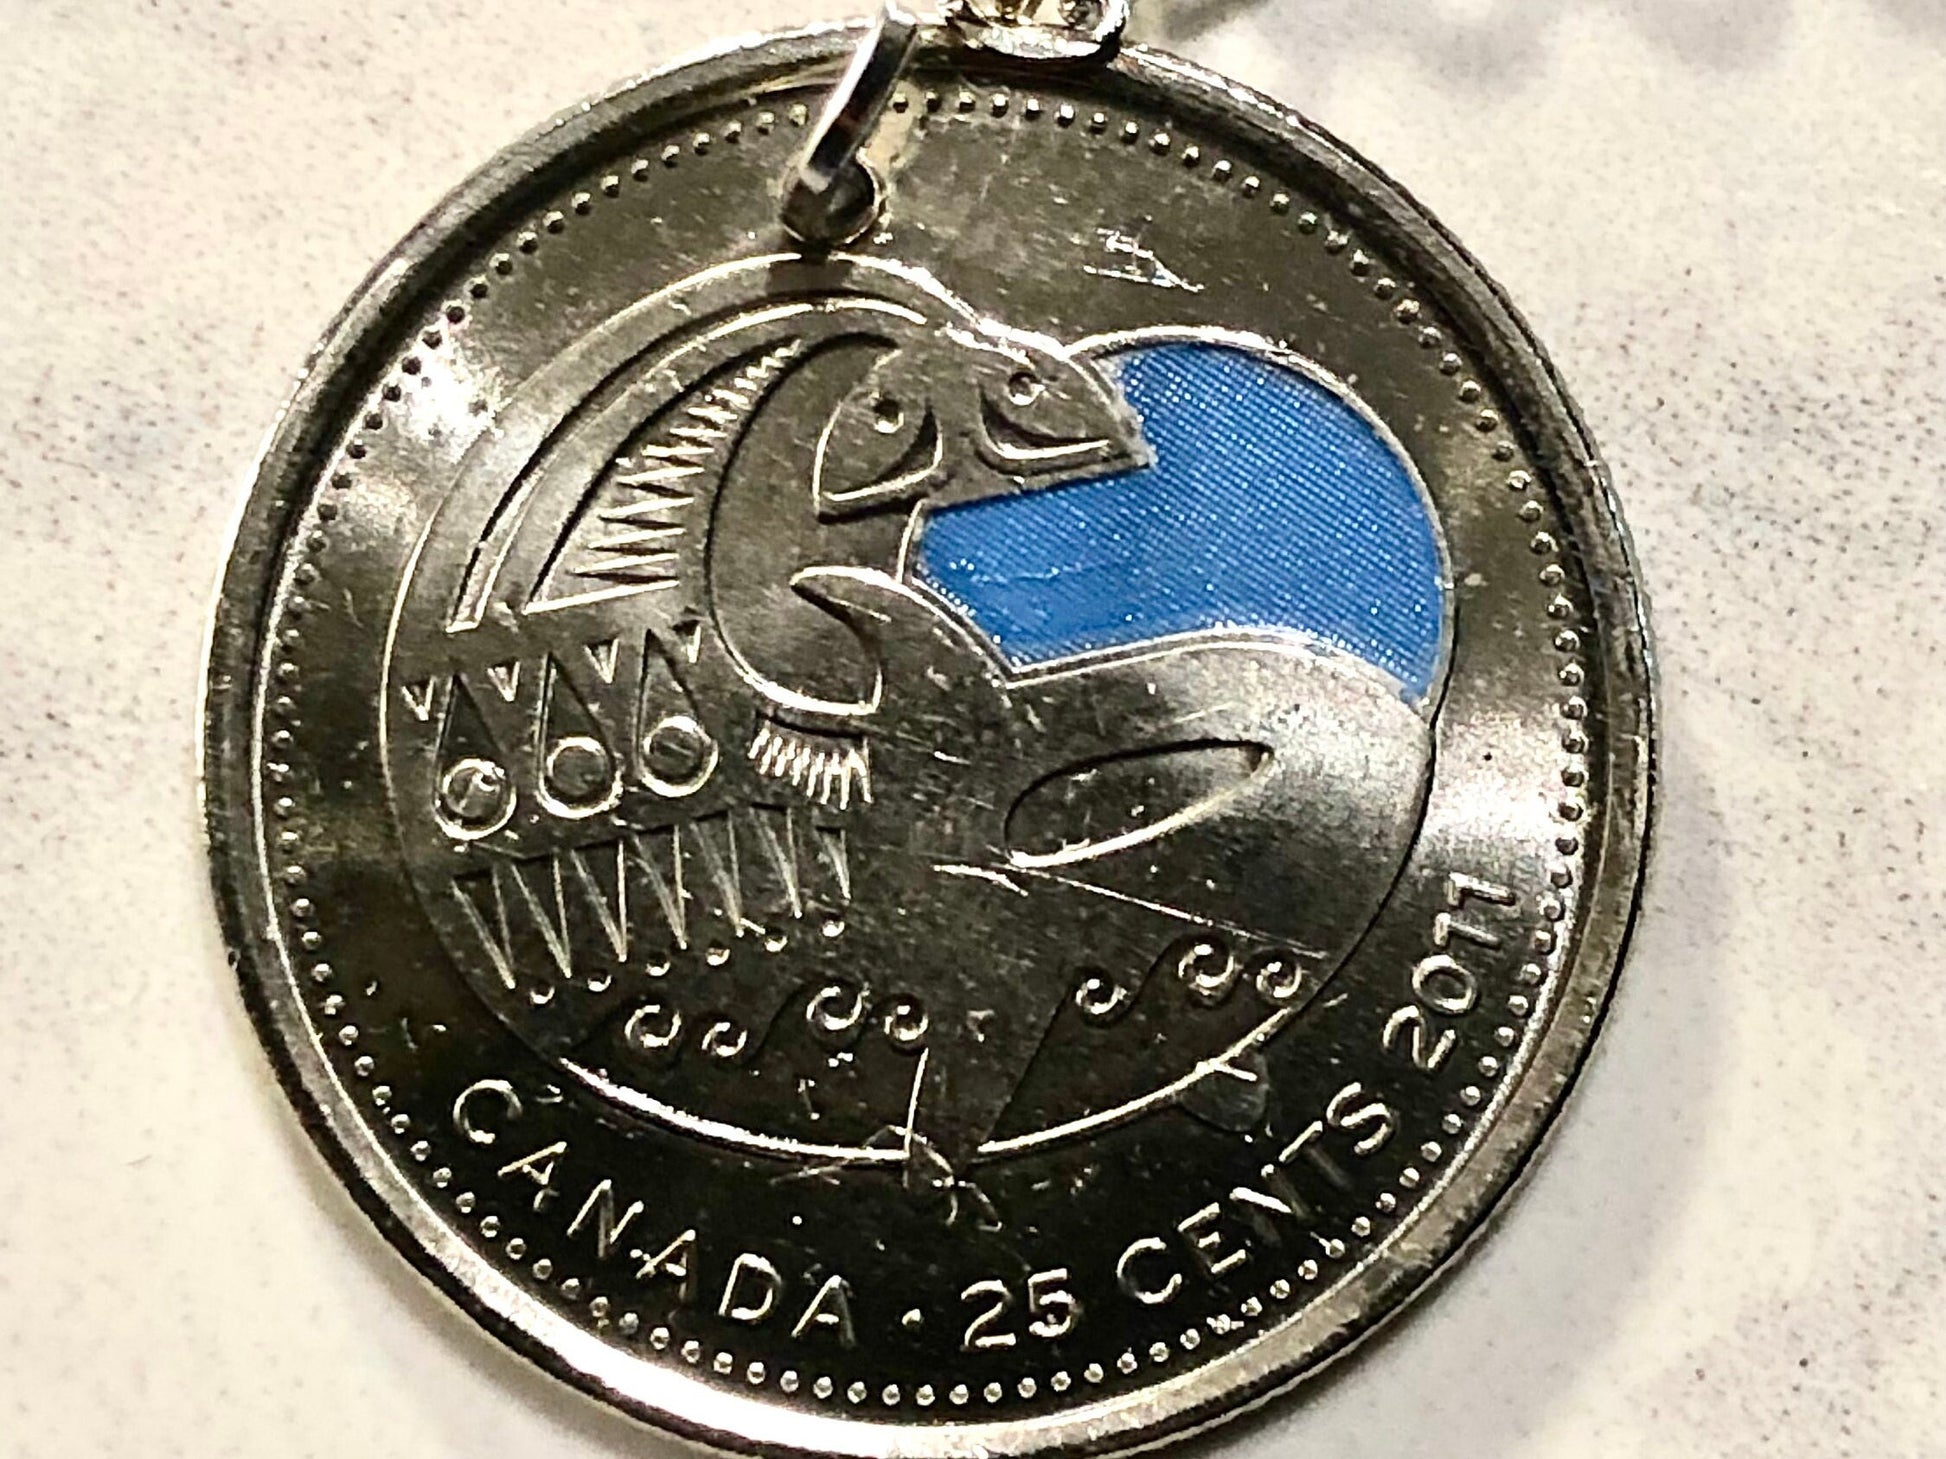 Canadian Quarter Coin Necklace 2011 Orca Killer Whale Coloured Uncirculated 25 Cents Custom Made Vintage Rare Coins Coin Enthusiast Canada